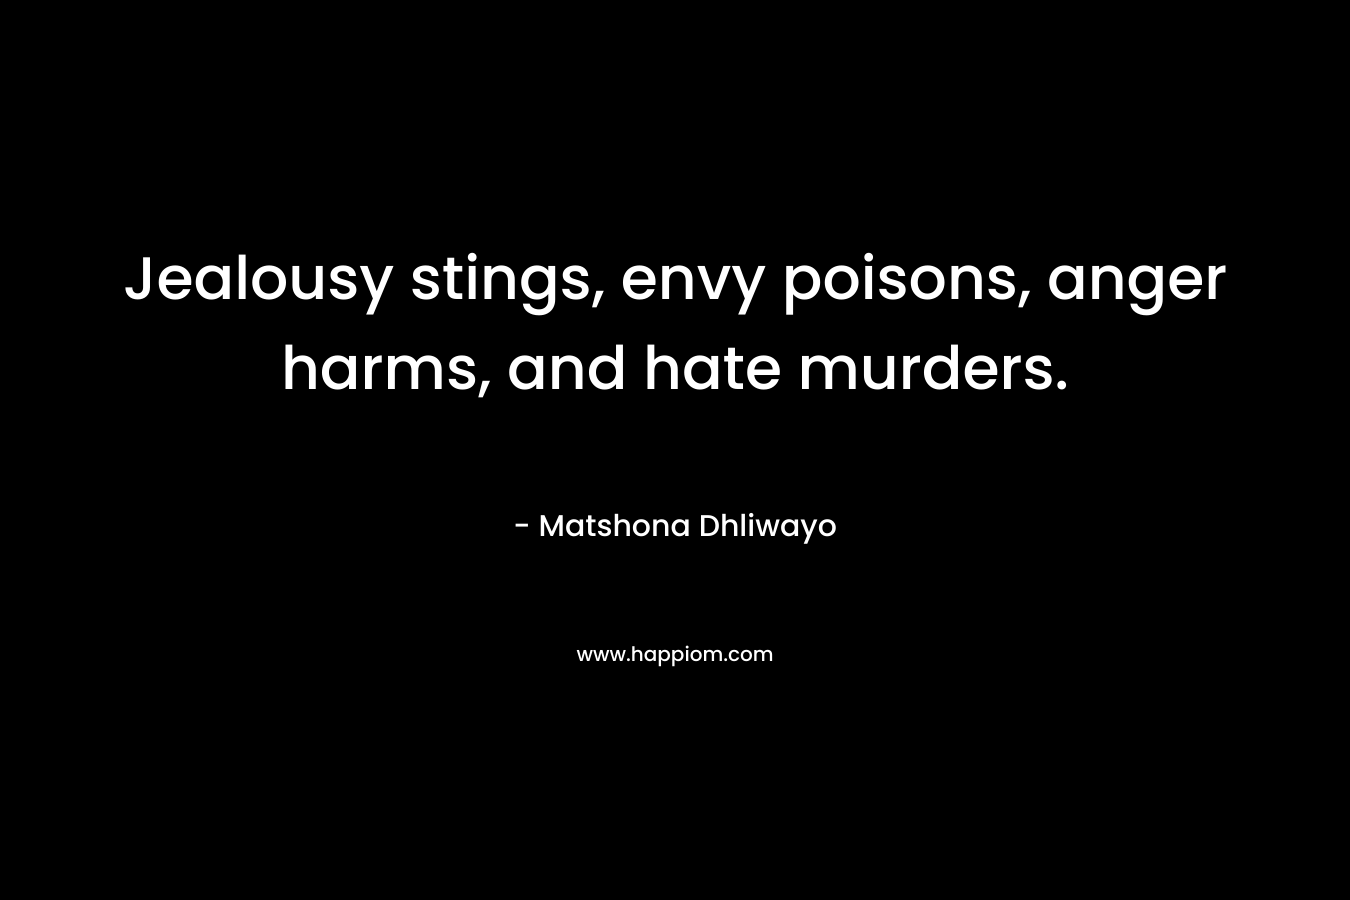 Jealousy stings, envy poisons, anger harms, and hate murders.